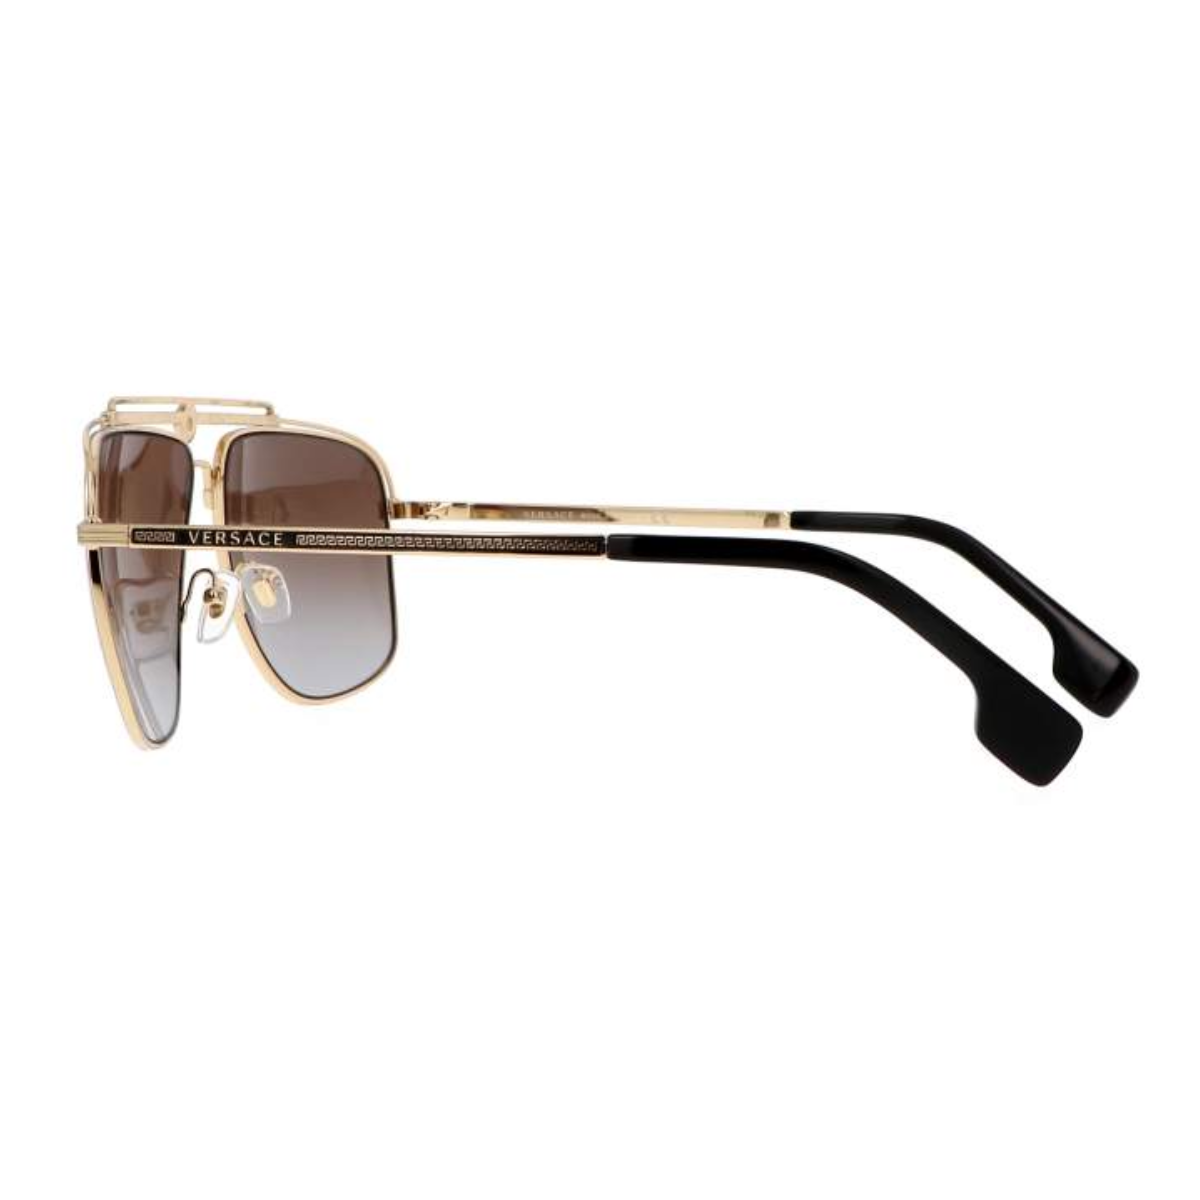 "Elevate your style with Versace 2242 100287 Sunglasses from Optorium. Unisex brown gradient lens, sleek black and gold temples. Shop now at optorium"